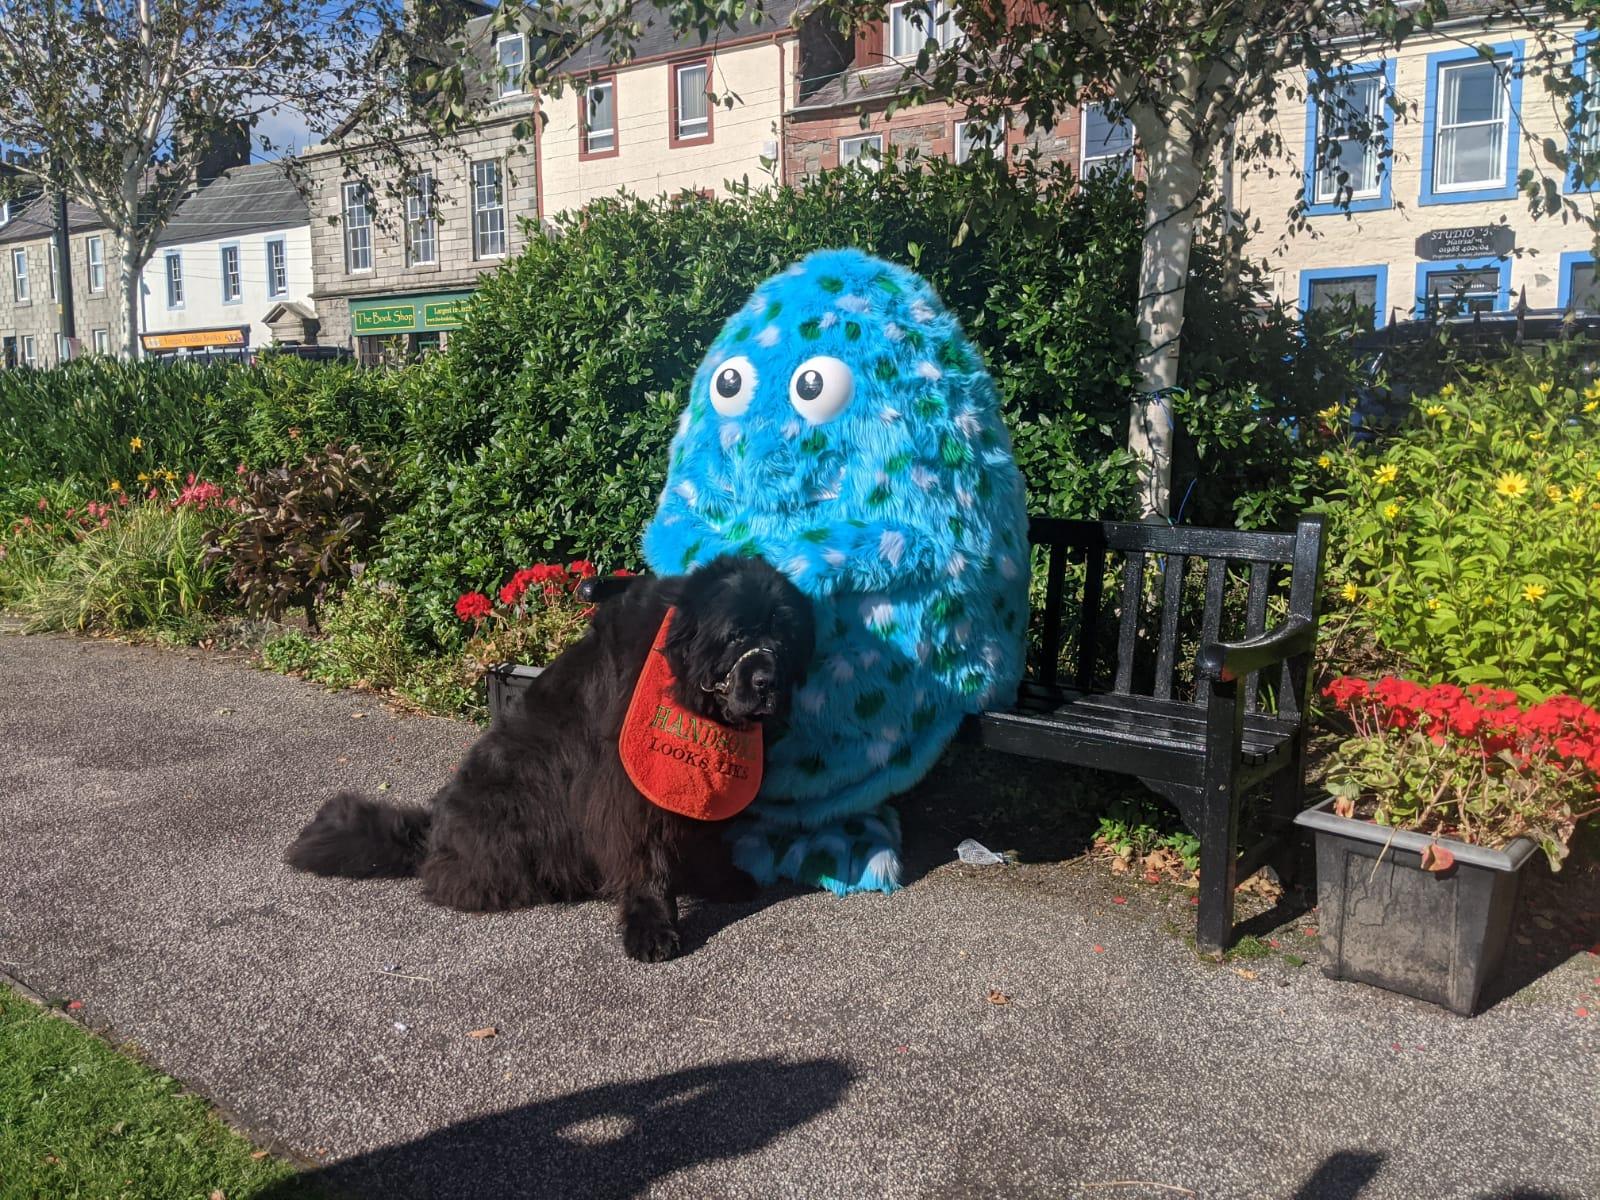 Big Wig is sitting in Wigtown Gardens with a black Newfoundland dog. Bushes, flowers and bookshops are seen behind them.